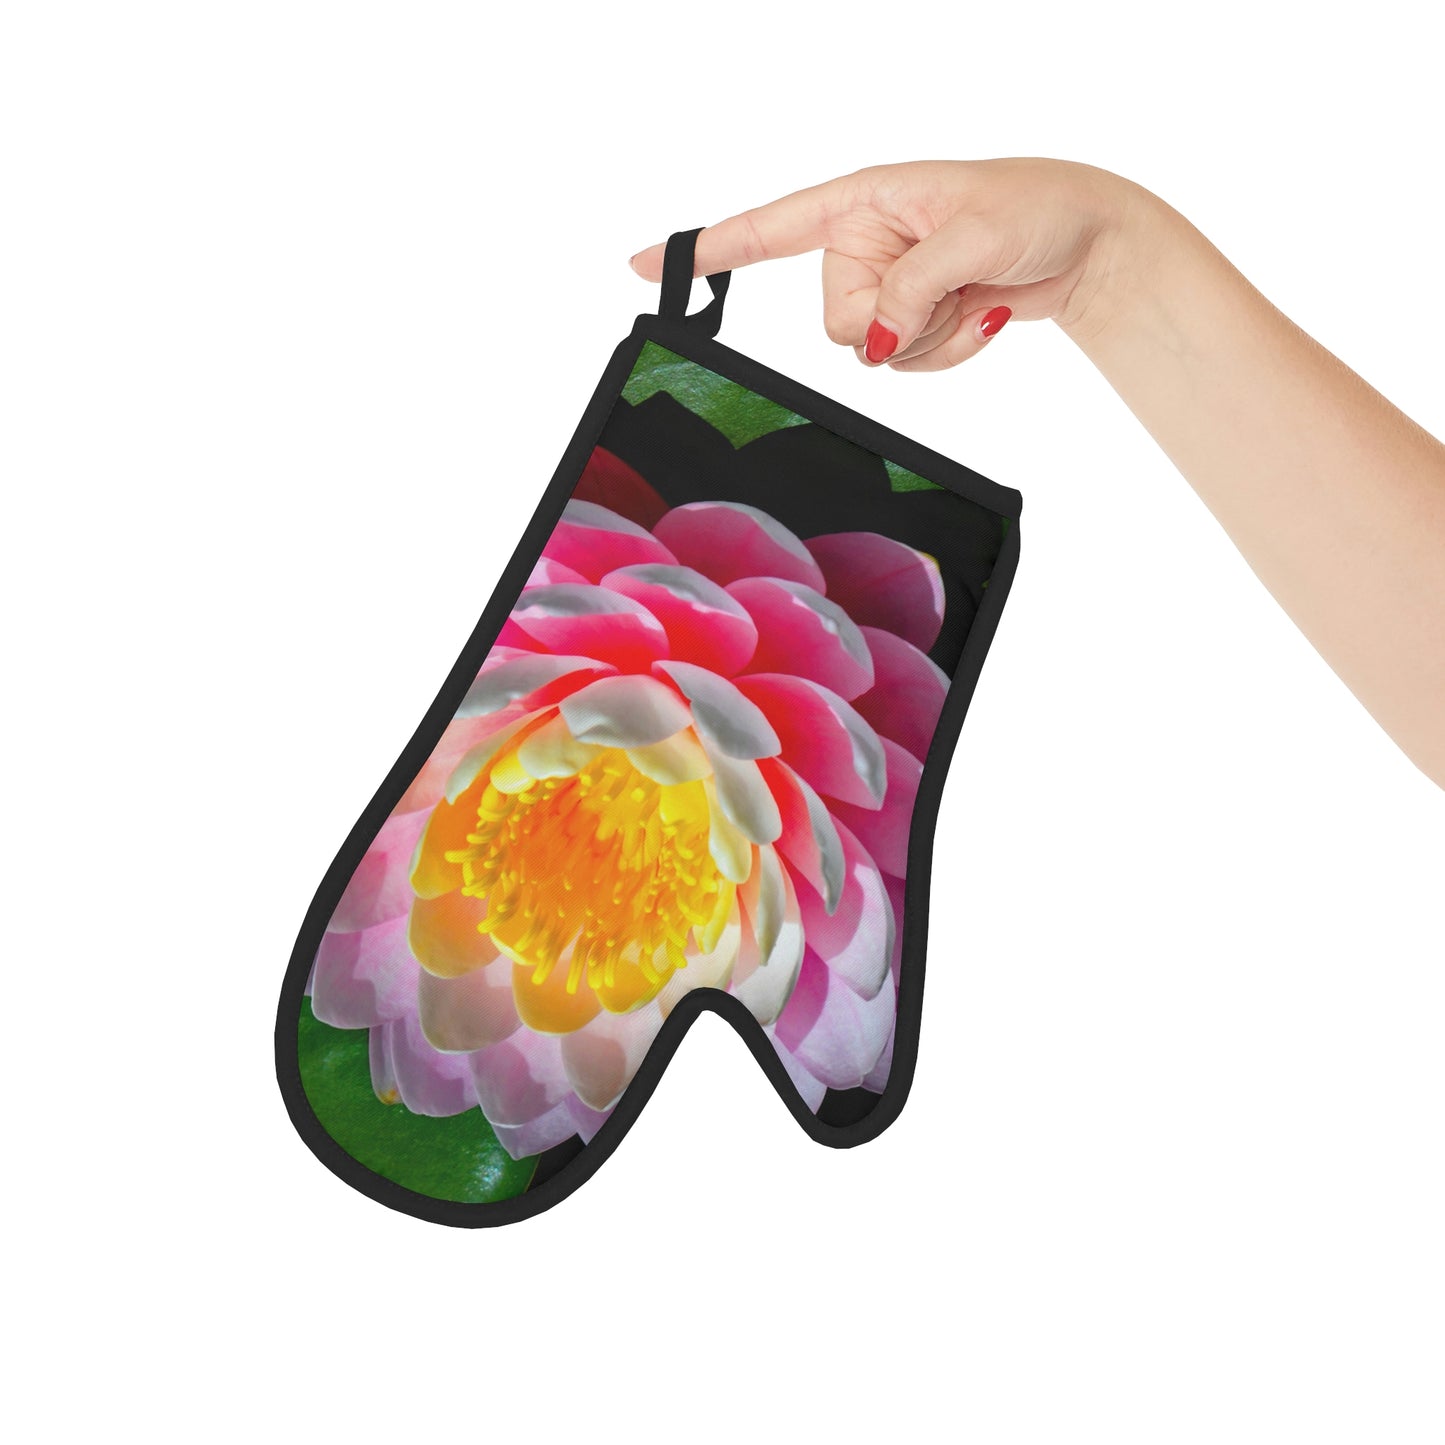 Flowers 26 Oven Glove